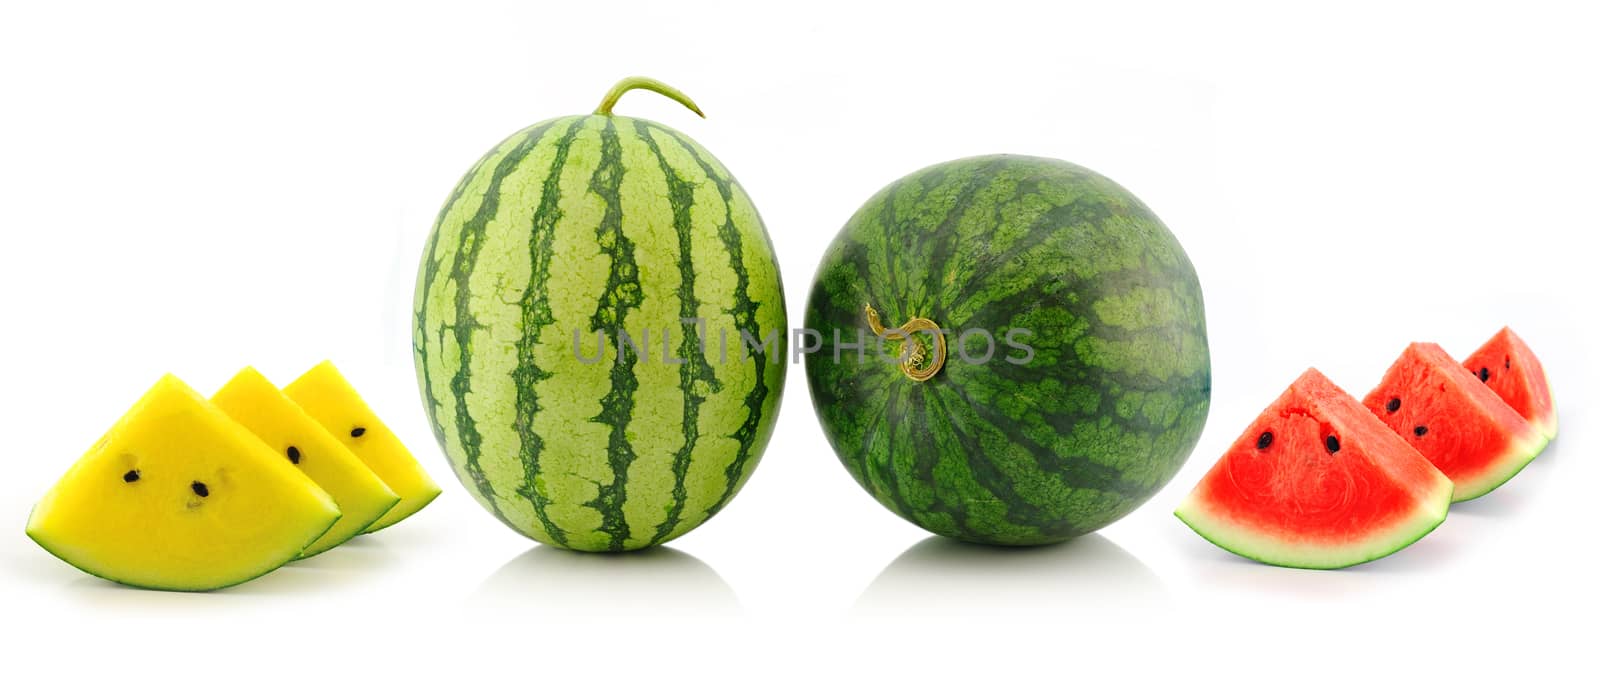 yellow red water melon on white background by sommai